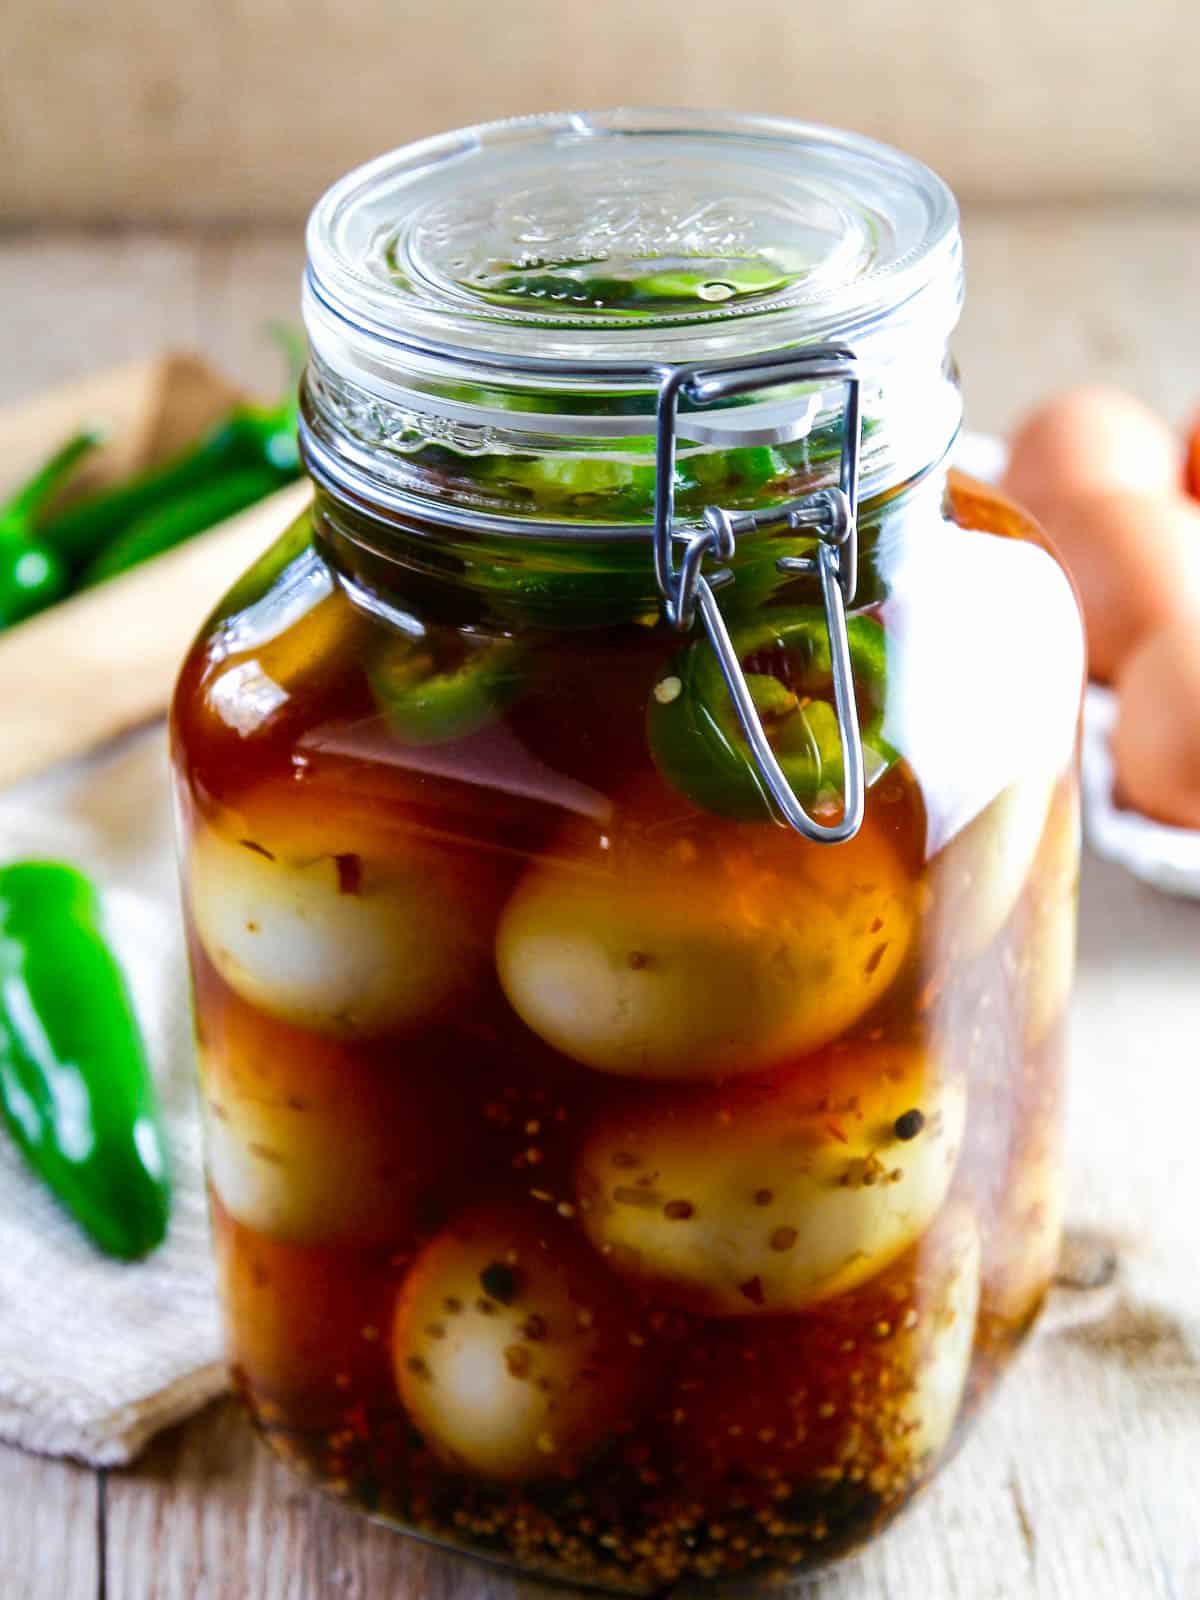 https://www.delicioustable.com/wp-content/uploads/2021/04/Jar-of-Jalapeno-Spicy-Pickled-Eggs-in-large-jar.jpg